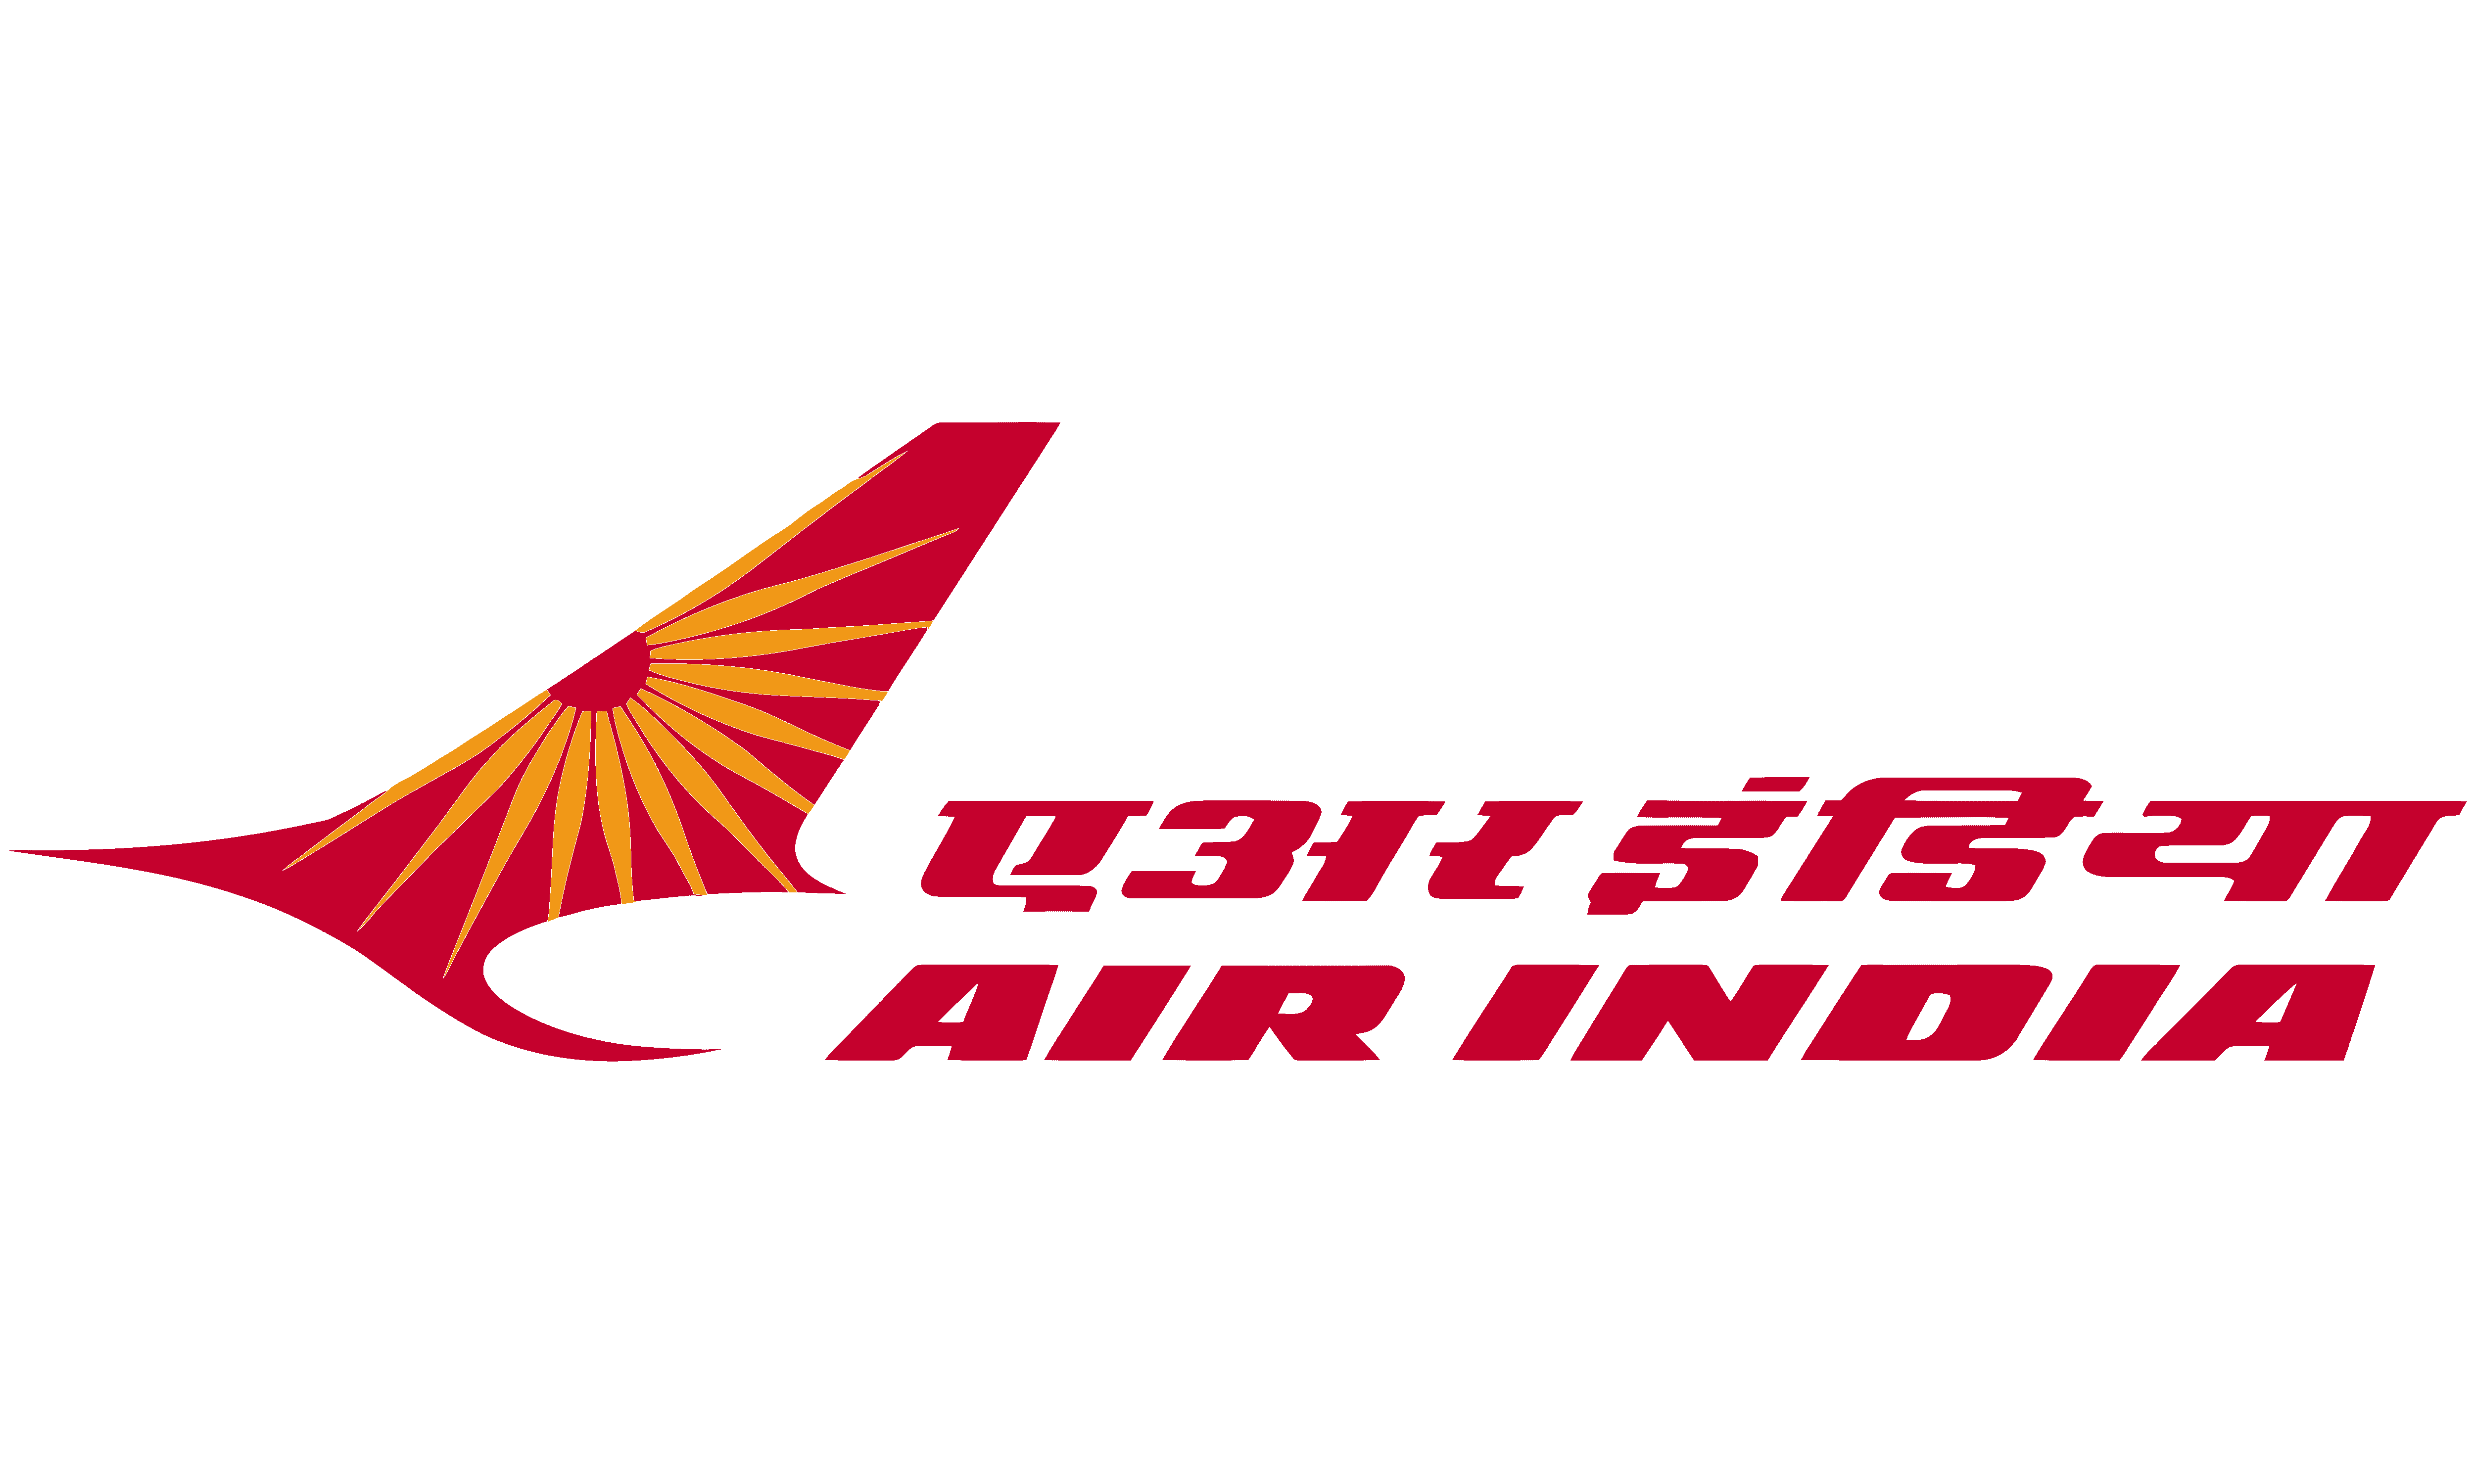 Air India to add over 4200 cabin crew and 900 pilots through 2023 to support ambitious growth plans